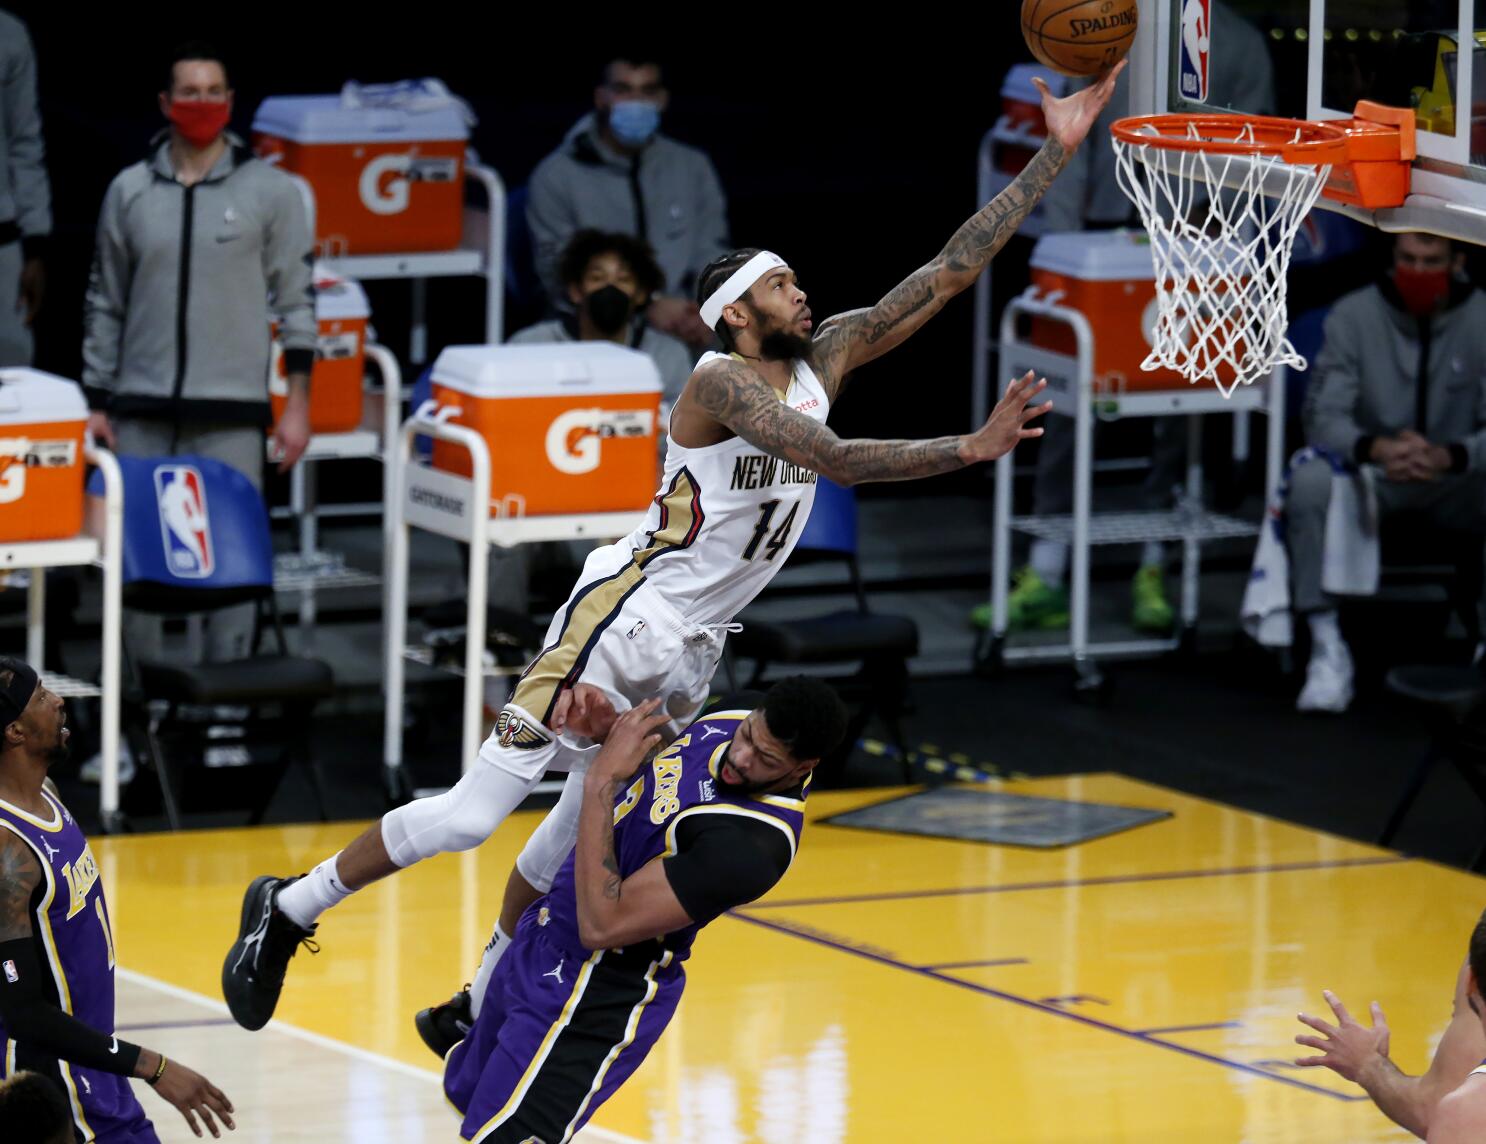 Lakers vs. Sixers: Brandon Ingram is the future star of the franchise 